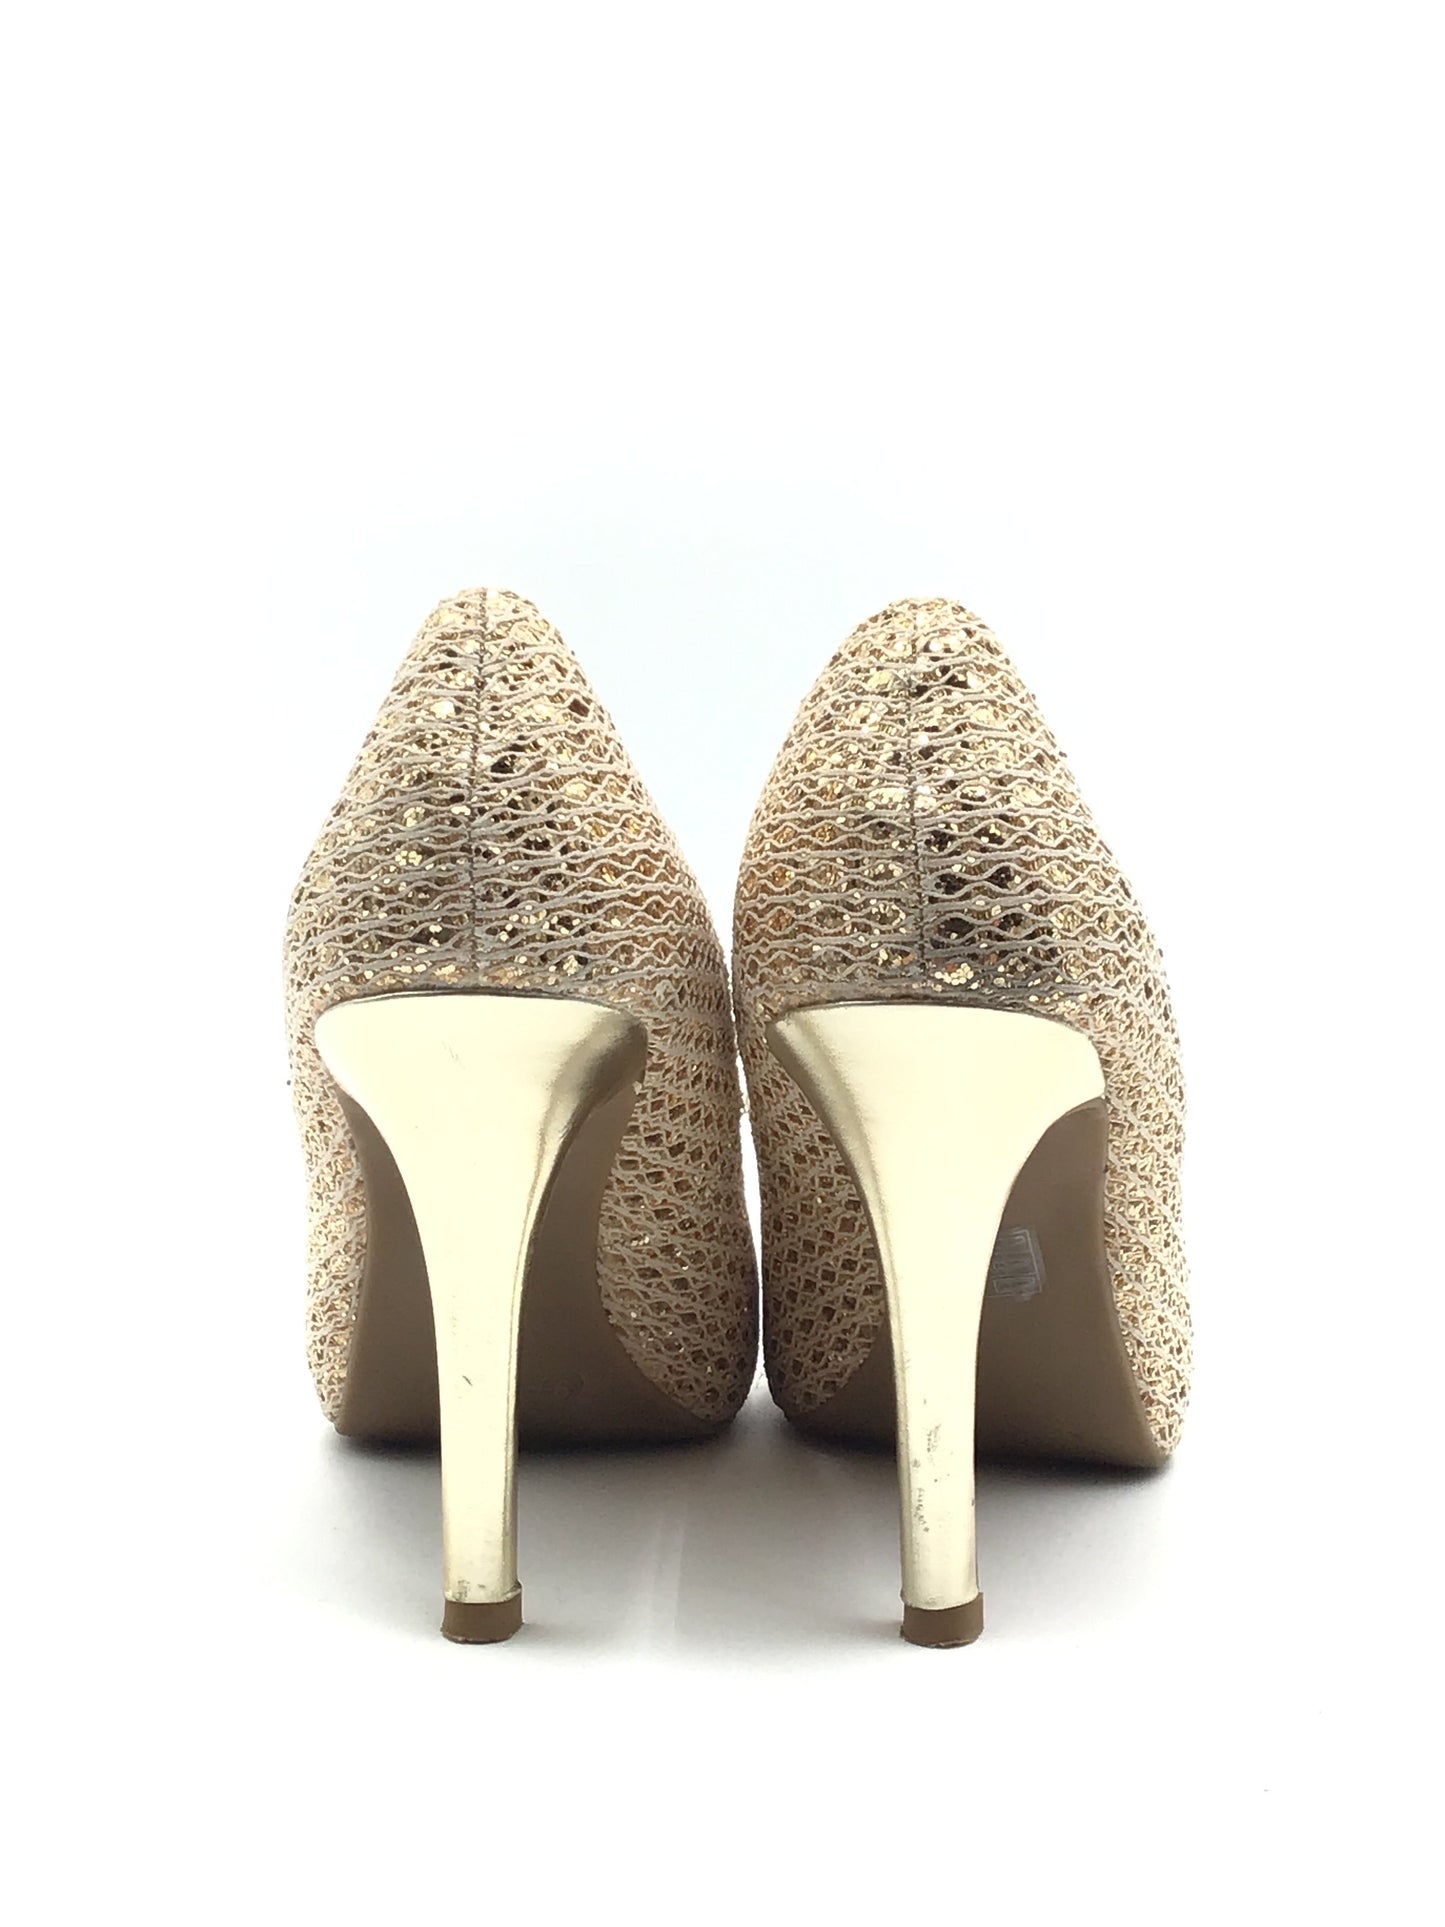 Shoes Heels Stiletto By Audrey Brooke  Size: 9